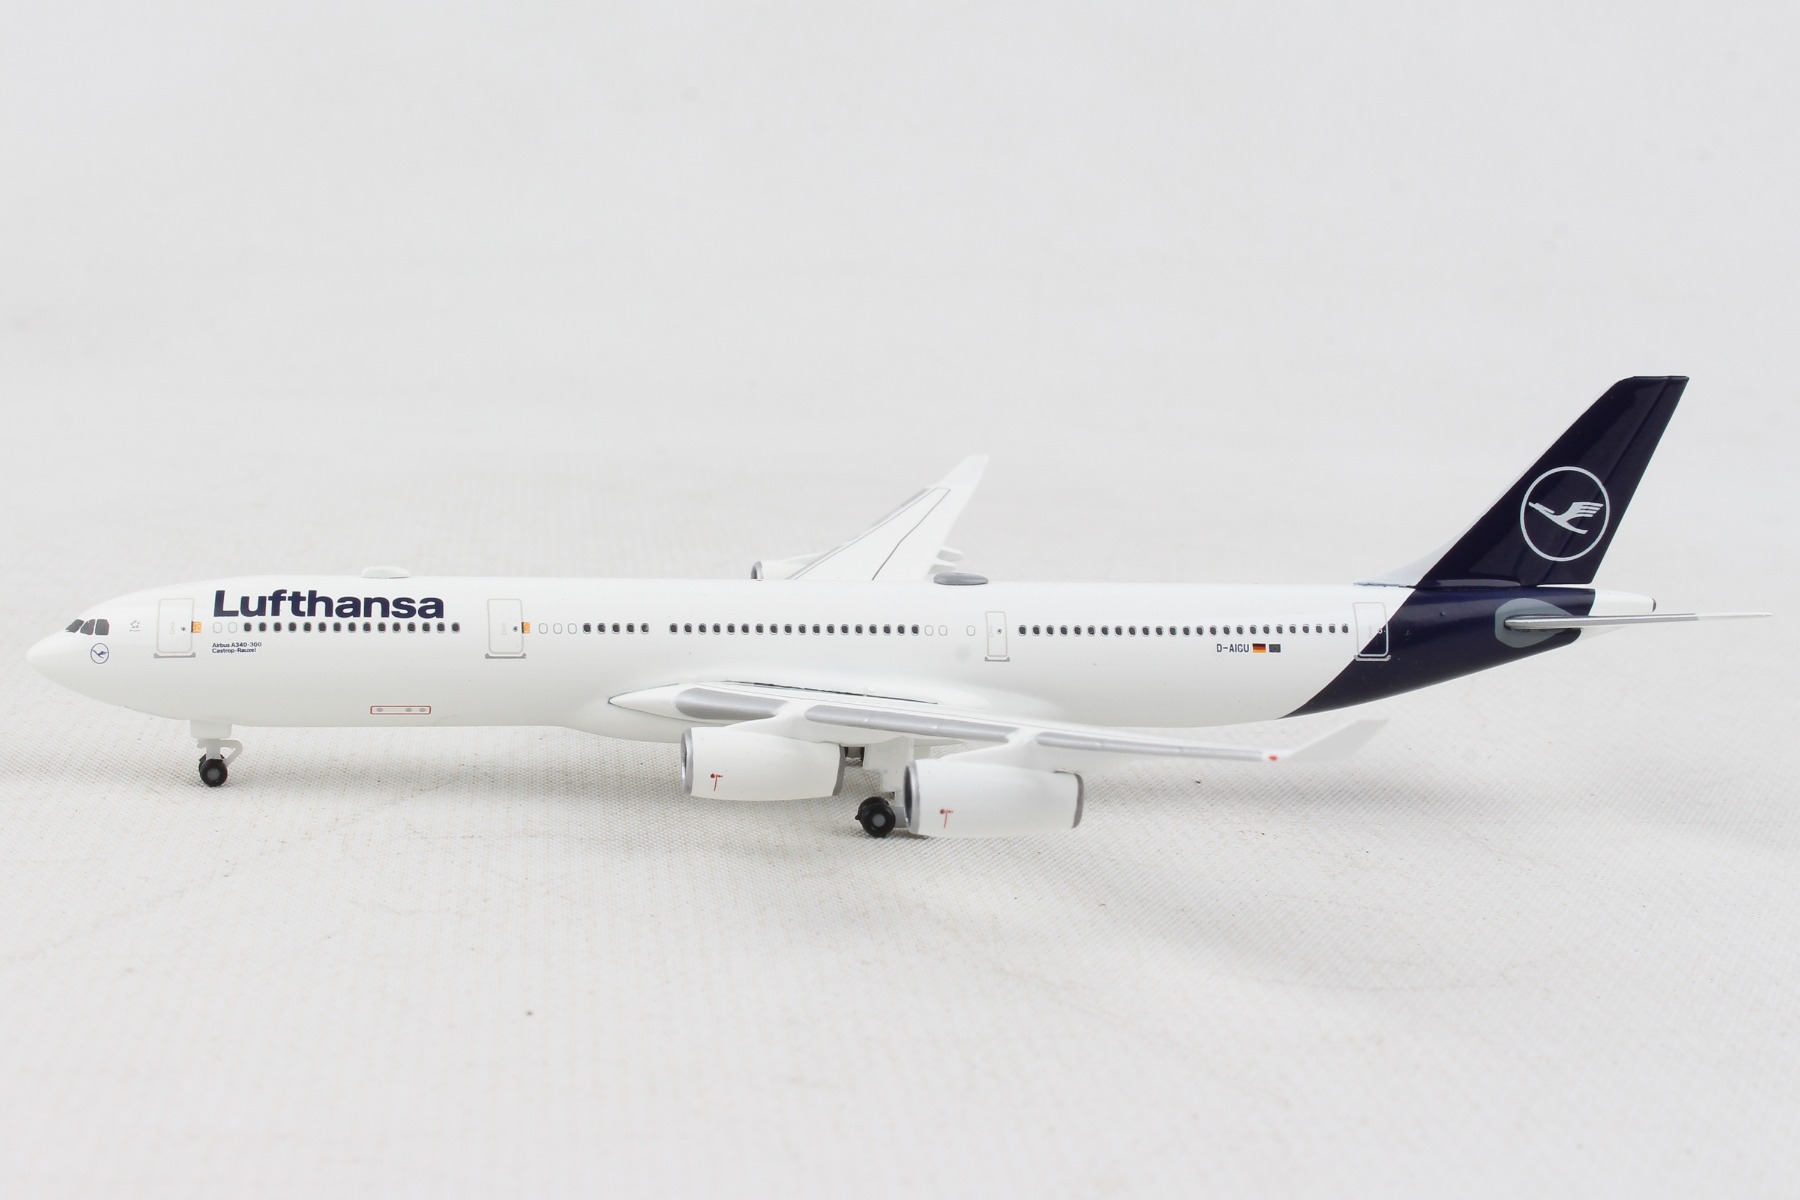 HERPA WINGS 1/500 SCALE EMIRATES A340-300 1/500BNHE527415 